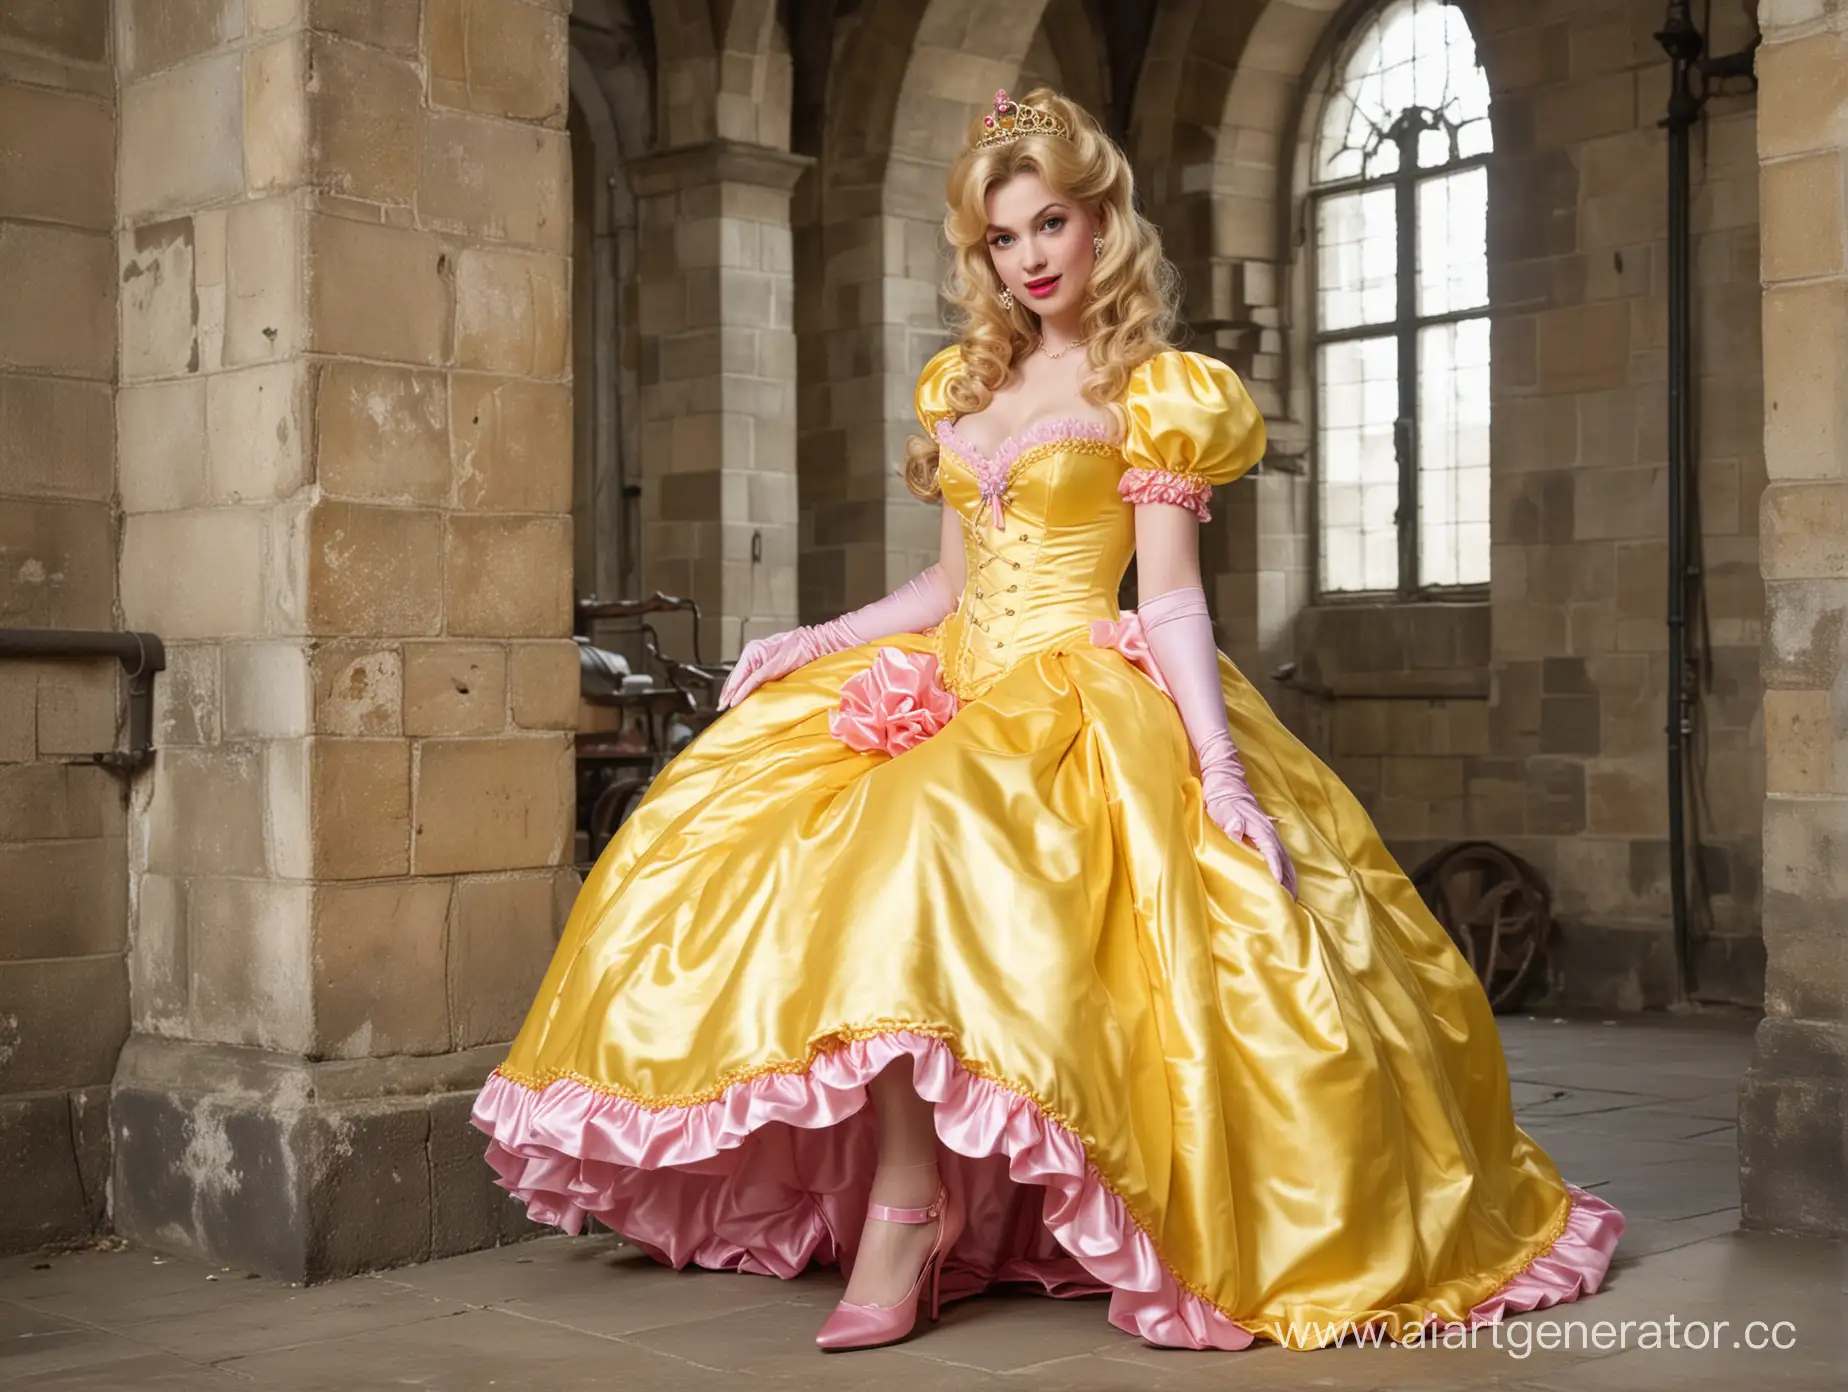 Princess-Peach-in-Satin-Yellow-Dress-with-Pink-Lips-and-Castle-Dungeon-View